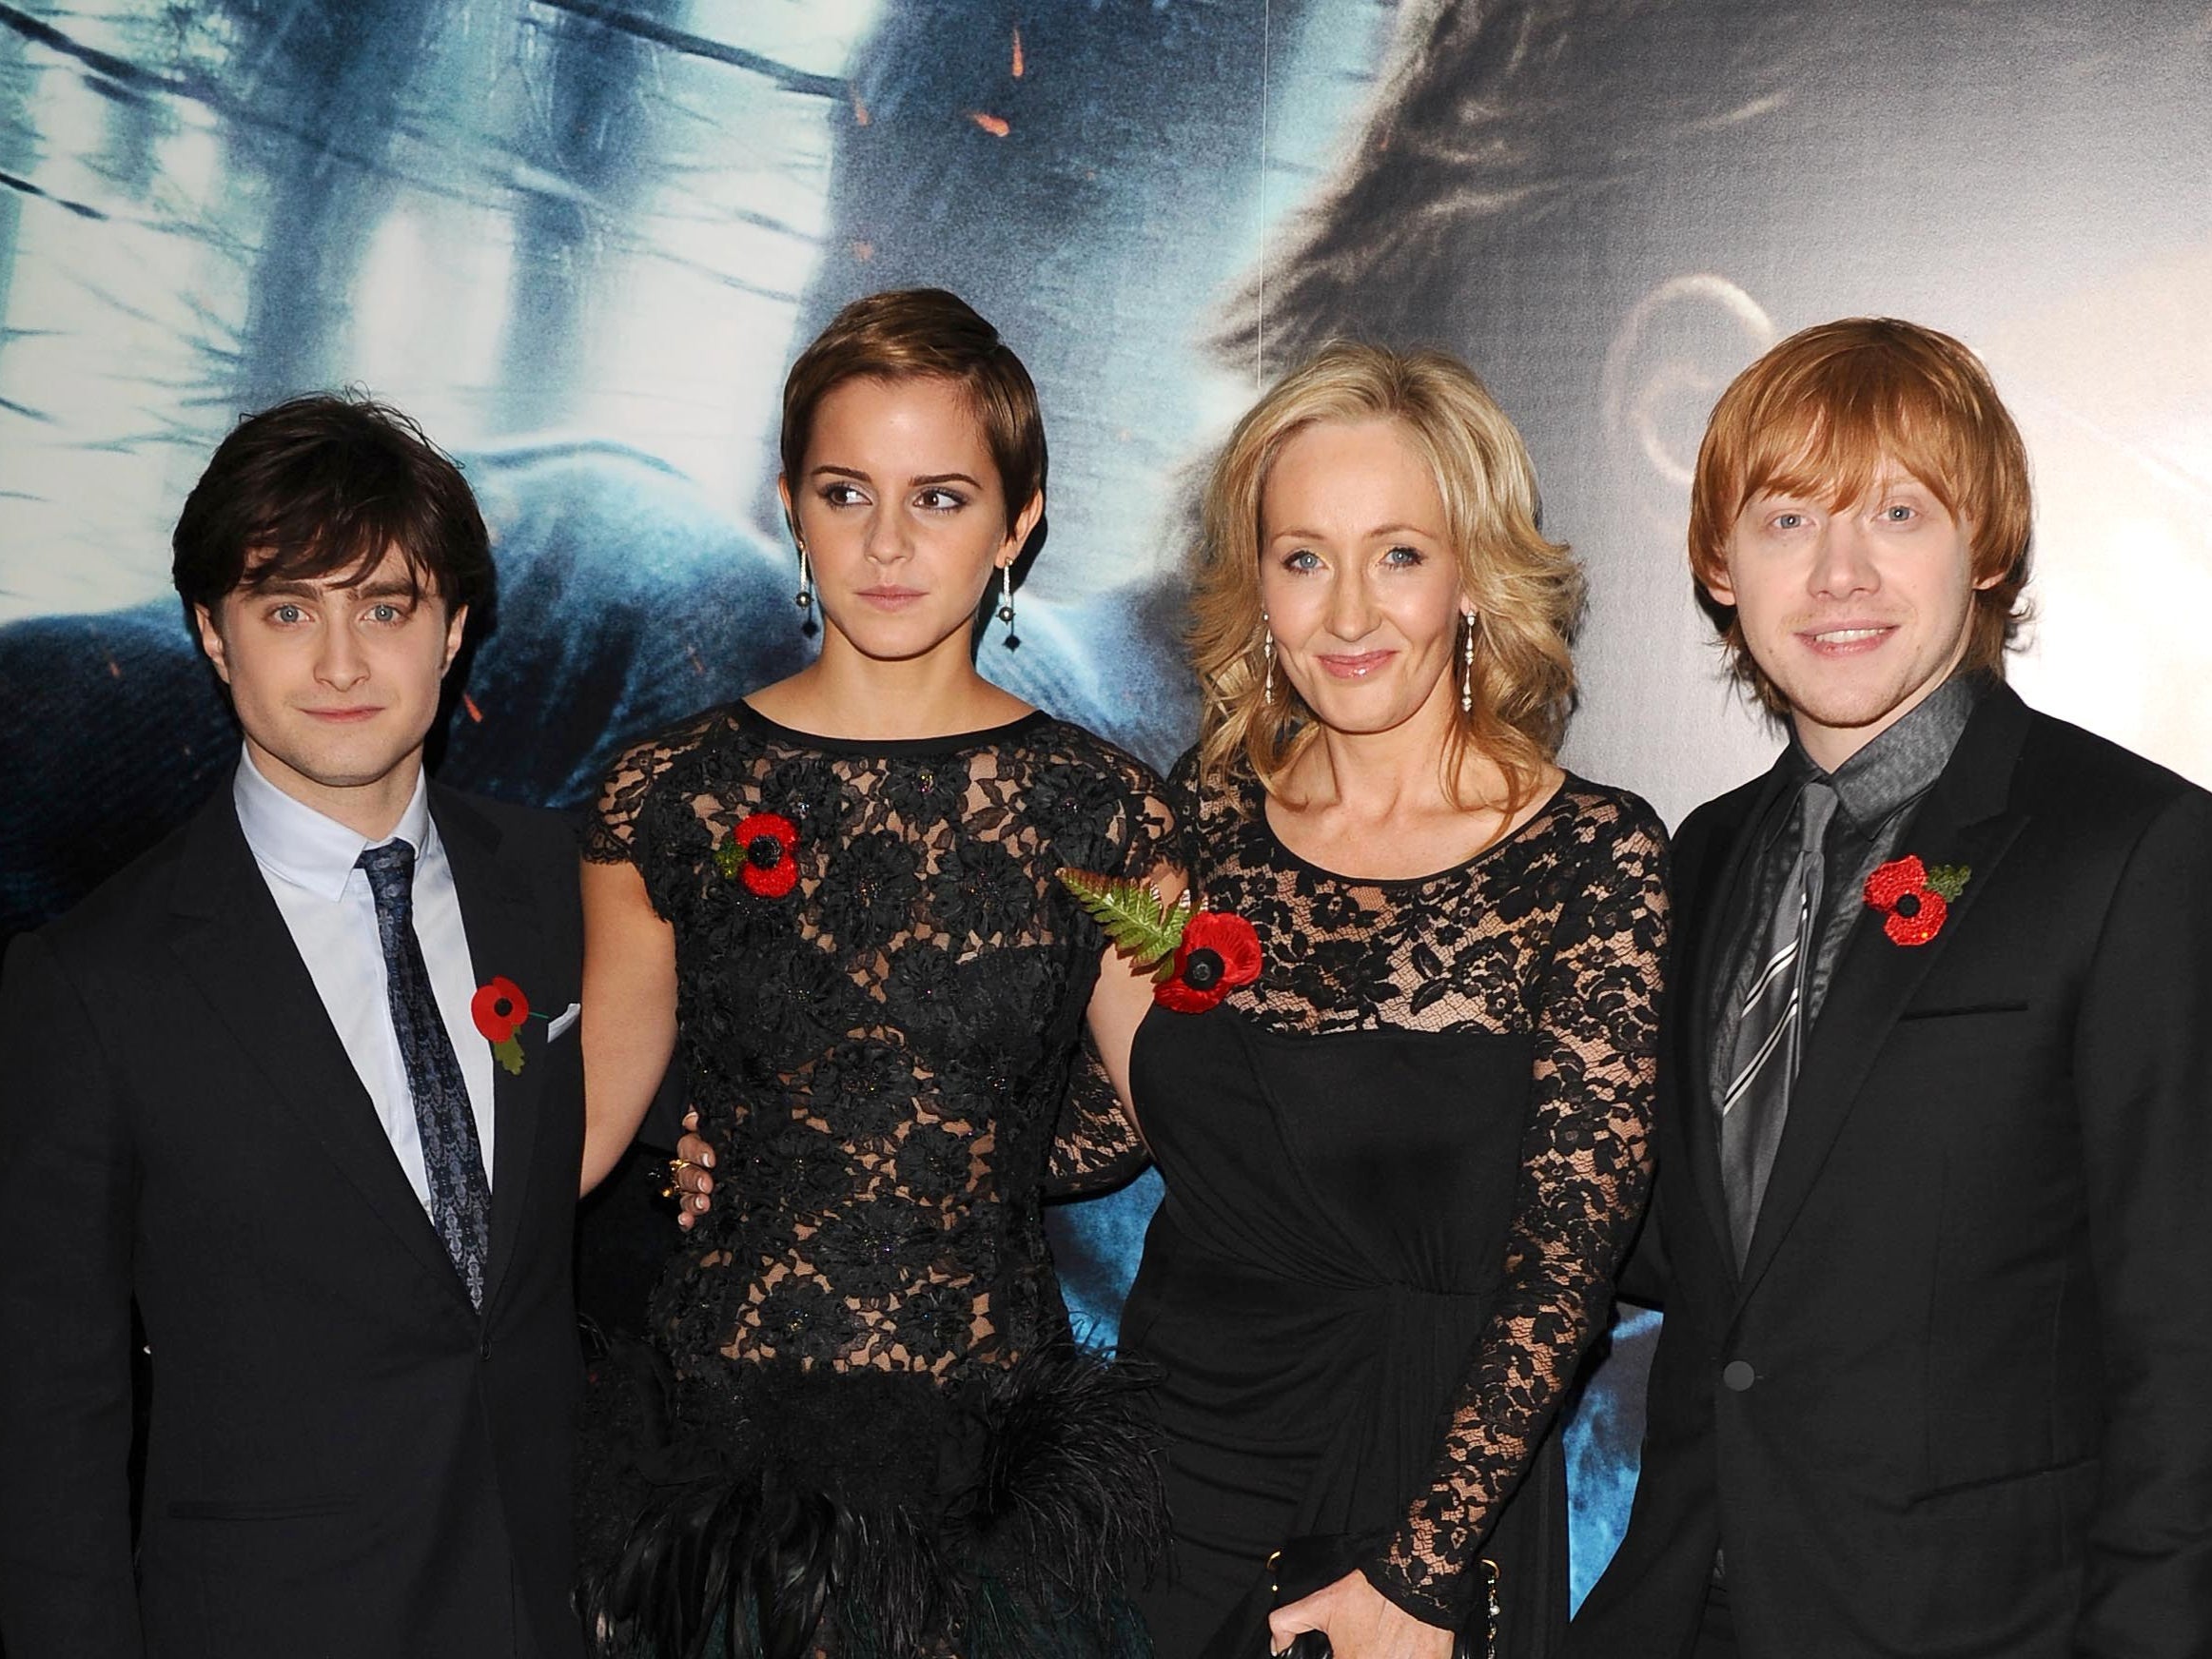 JK Rowling photographed with Daniel Radcliffe, Emma Watson and Rupert Grint at a ‘Harry Potter’ premiere in 2010